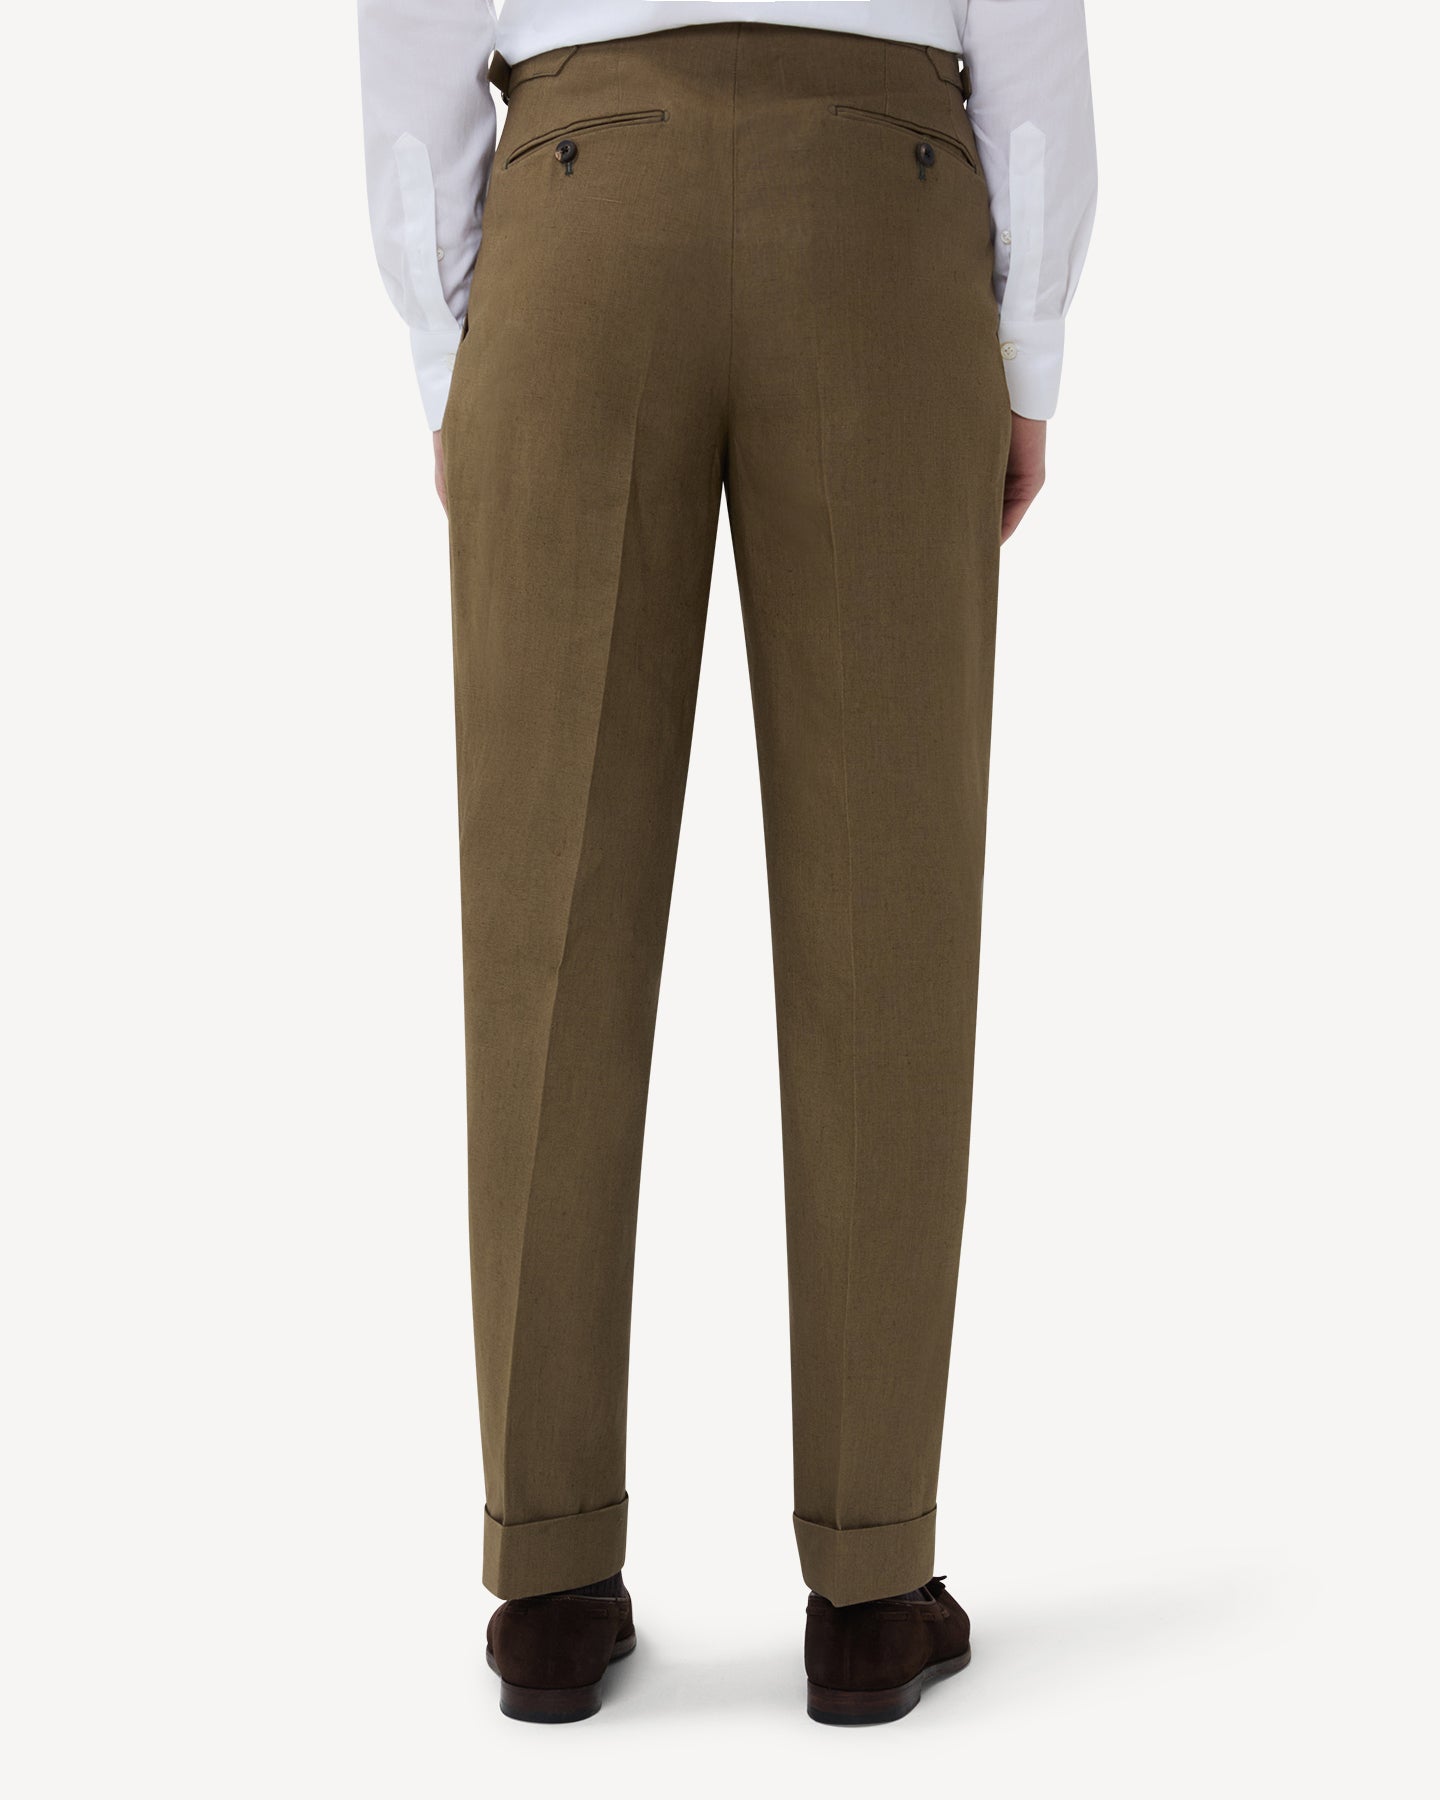 The back of olive brown linen trousers with single pleats and side adjusters